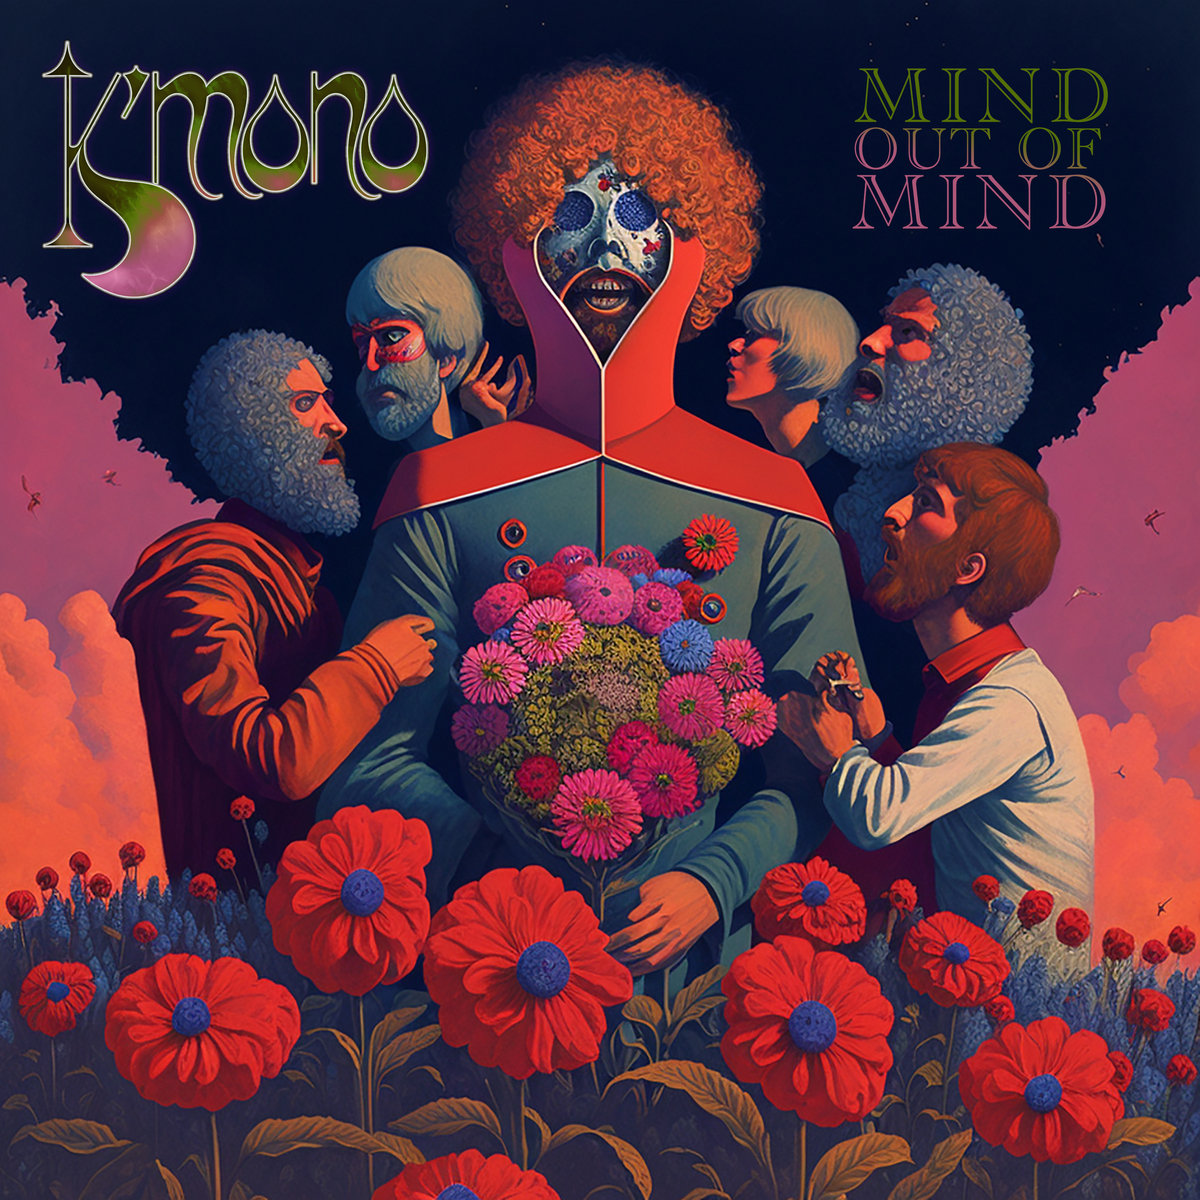 K'Mono with Tell Me The Love from new album Mind Out of Mind now playing on the #progmill @progzilla progzilla.com/listen